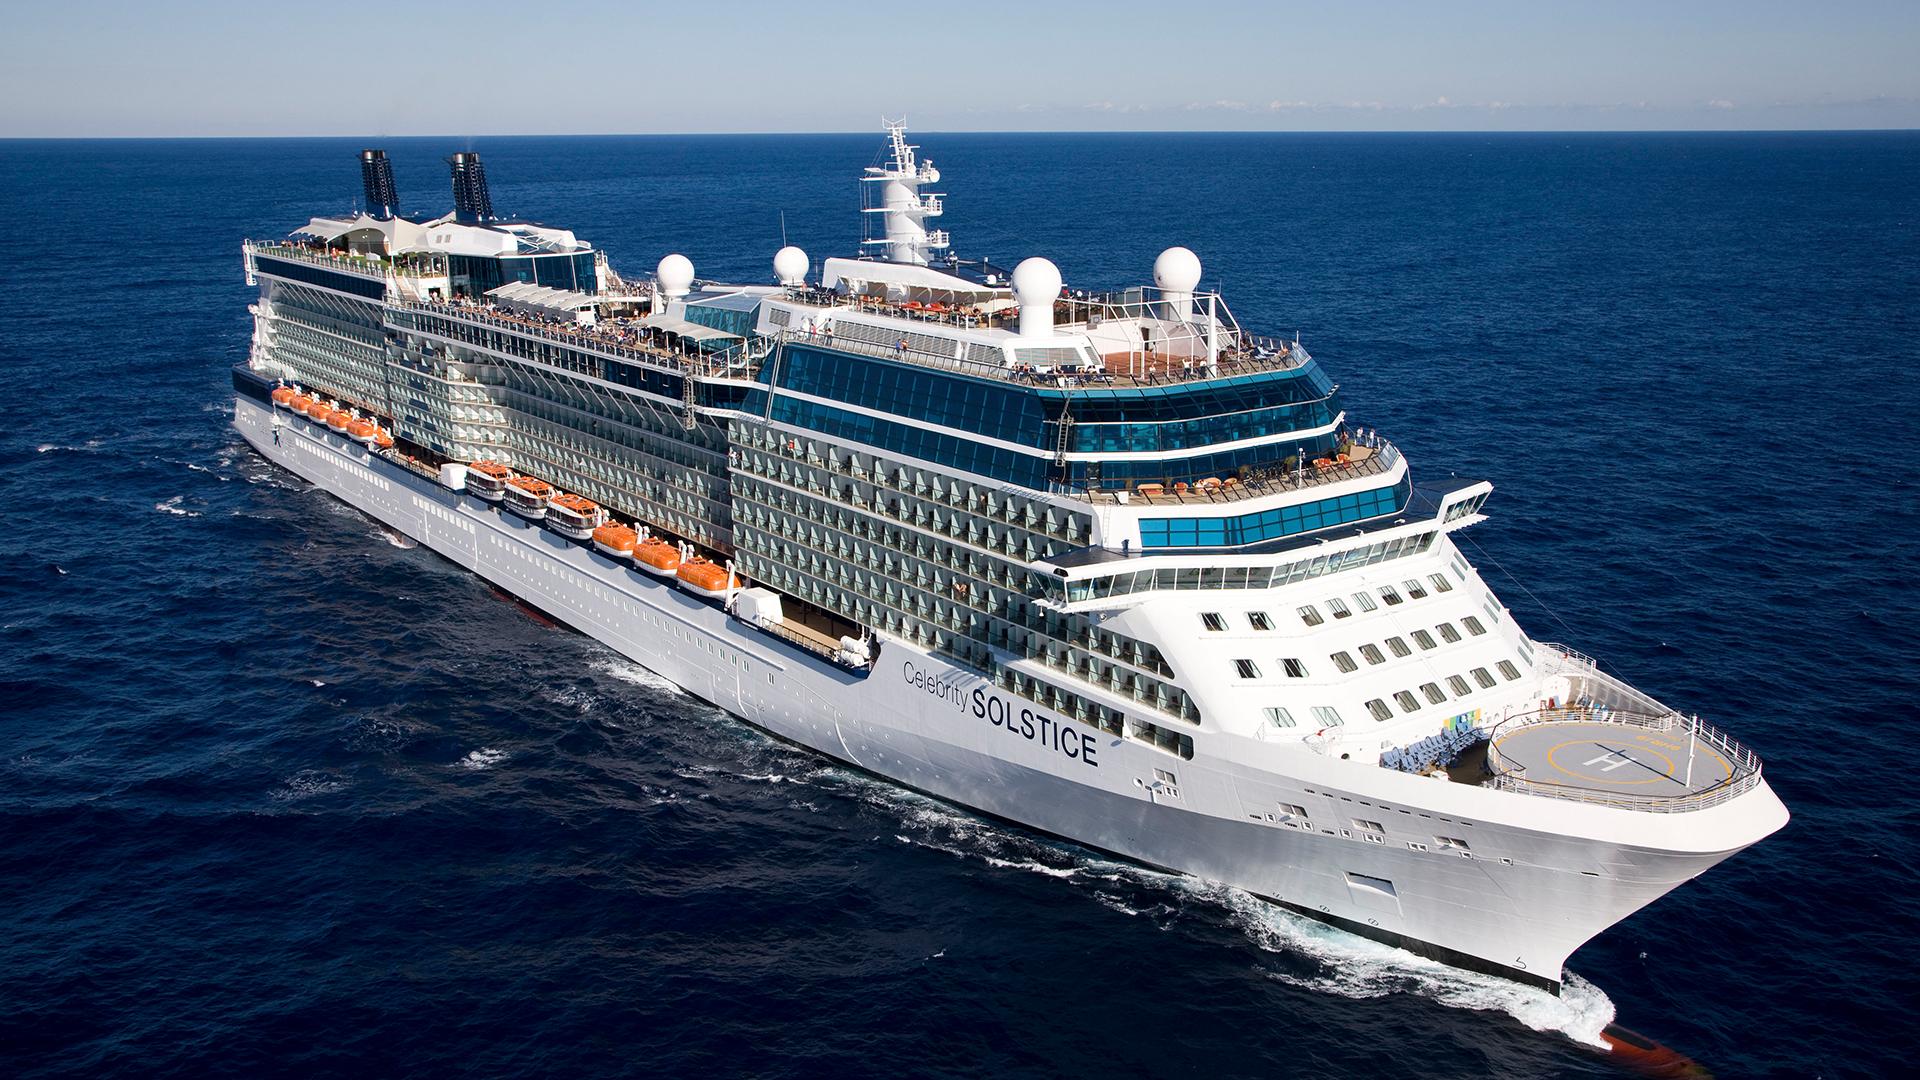 South Pacific Cruise: A 13-Night Celebrity Solstice® Roundtrip from New